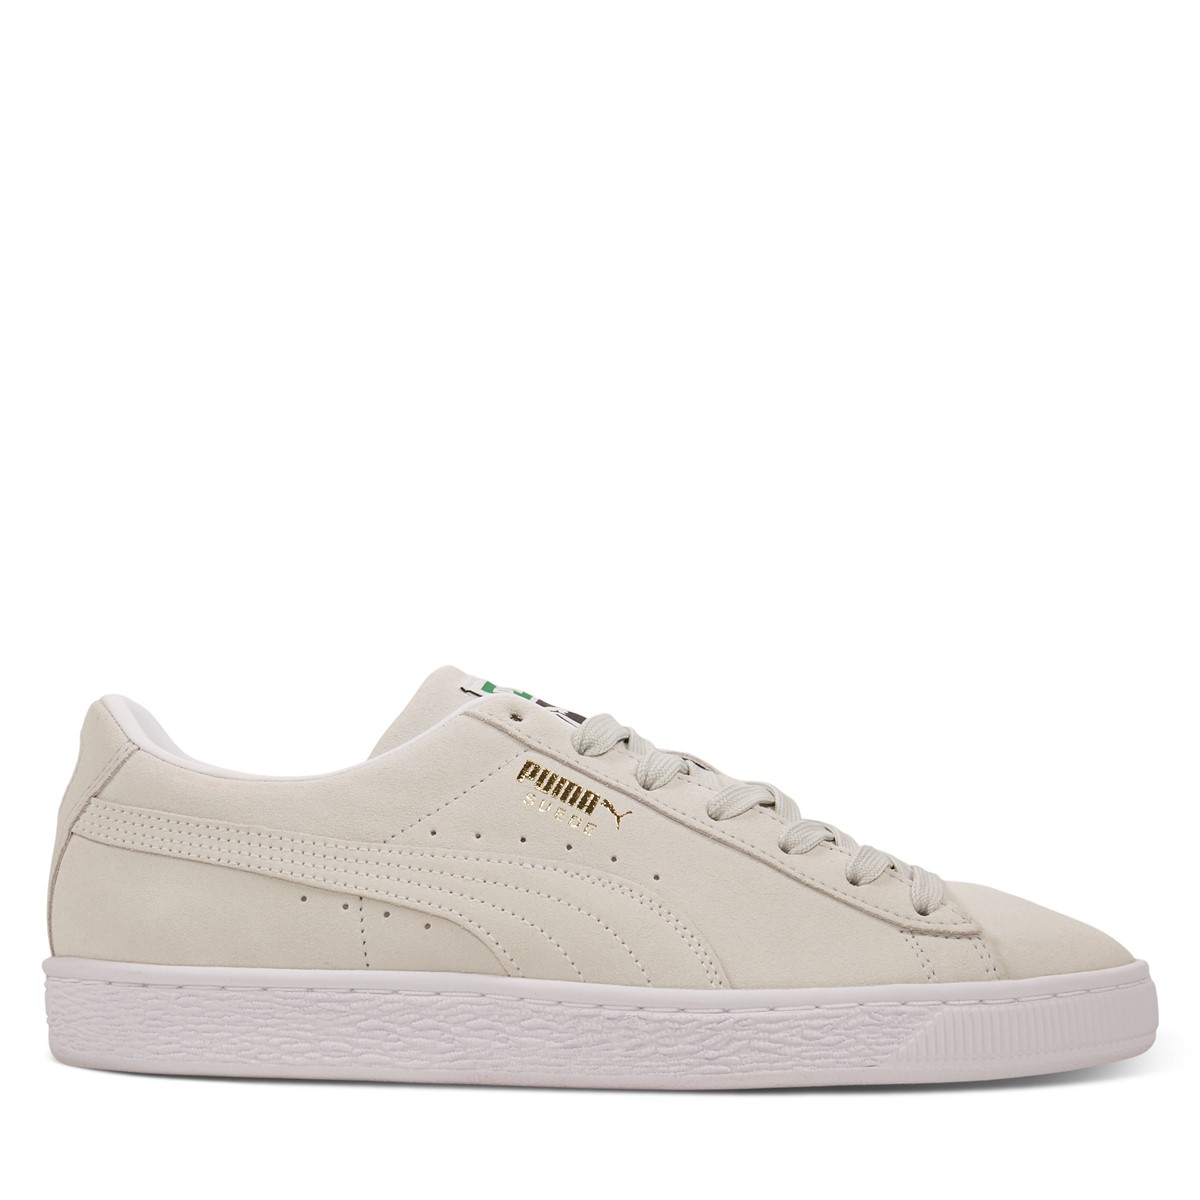 Men's Suede Classic Sneakers in Off-White